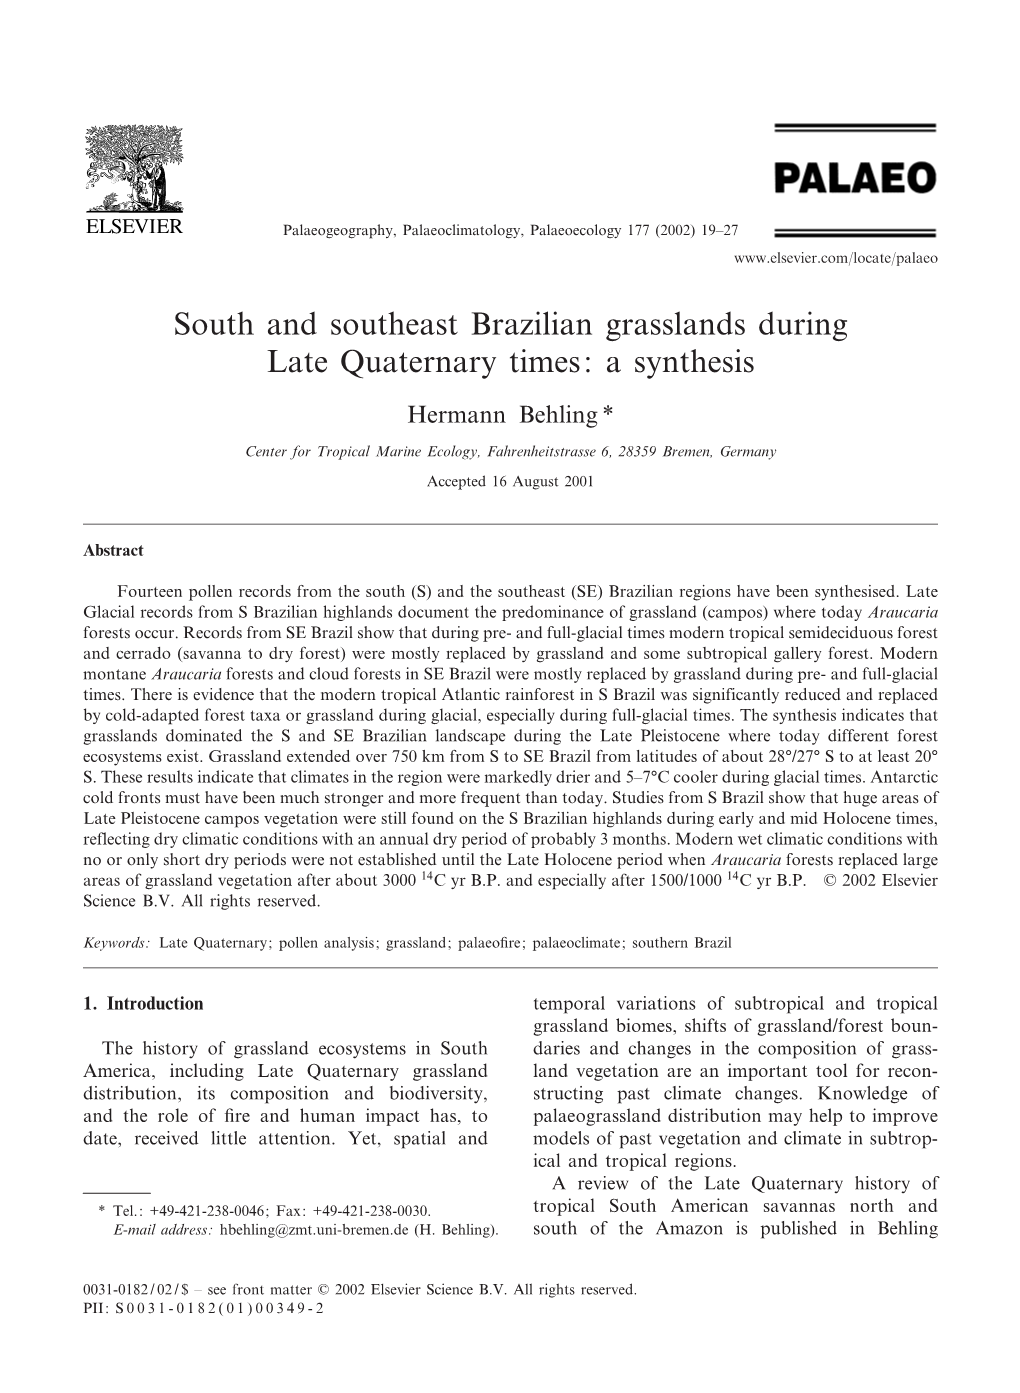 South and Southeast Brazilian Grasslands During Late Quaternary Times: a Synthesis